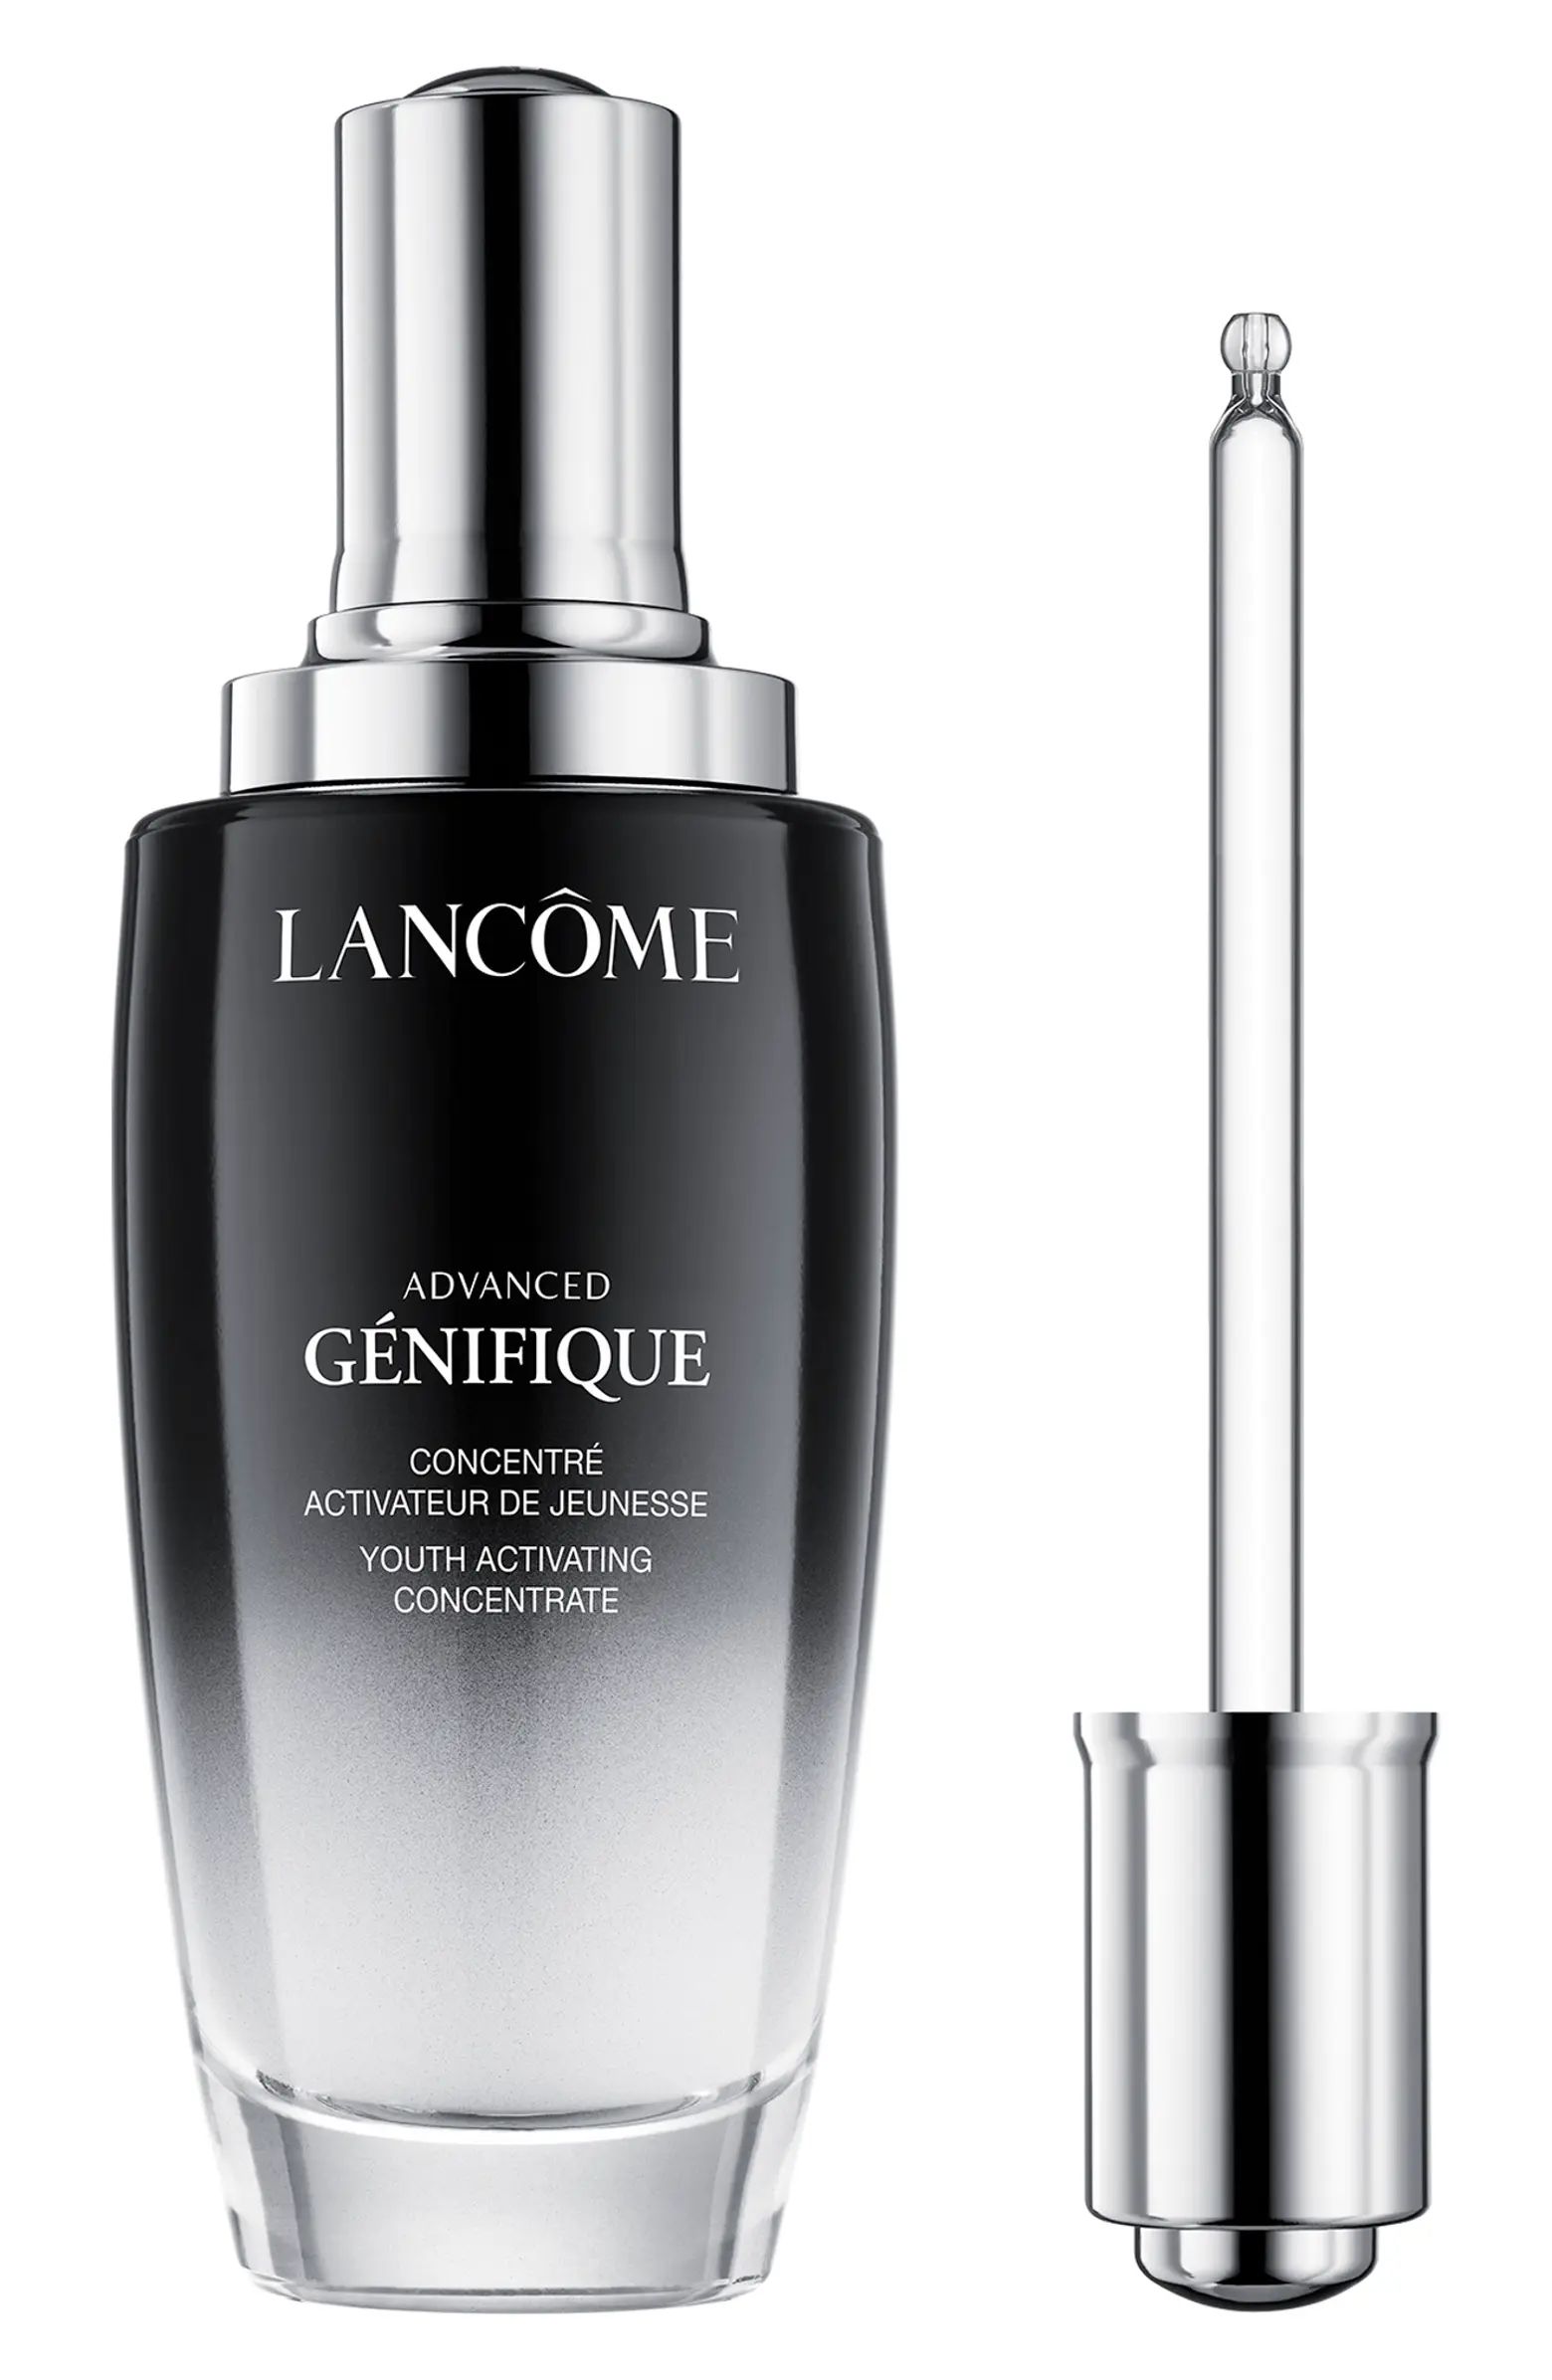 Advanced Génifique Youth Activating Concentrate Anti-Aging Face Serum | Nordstrom